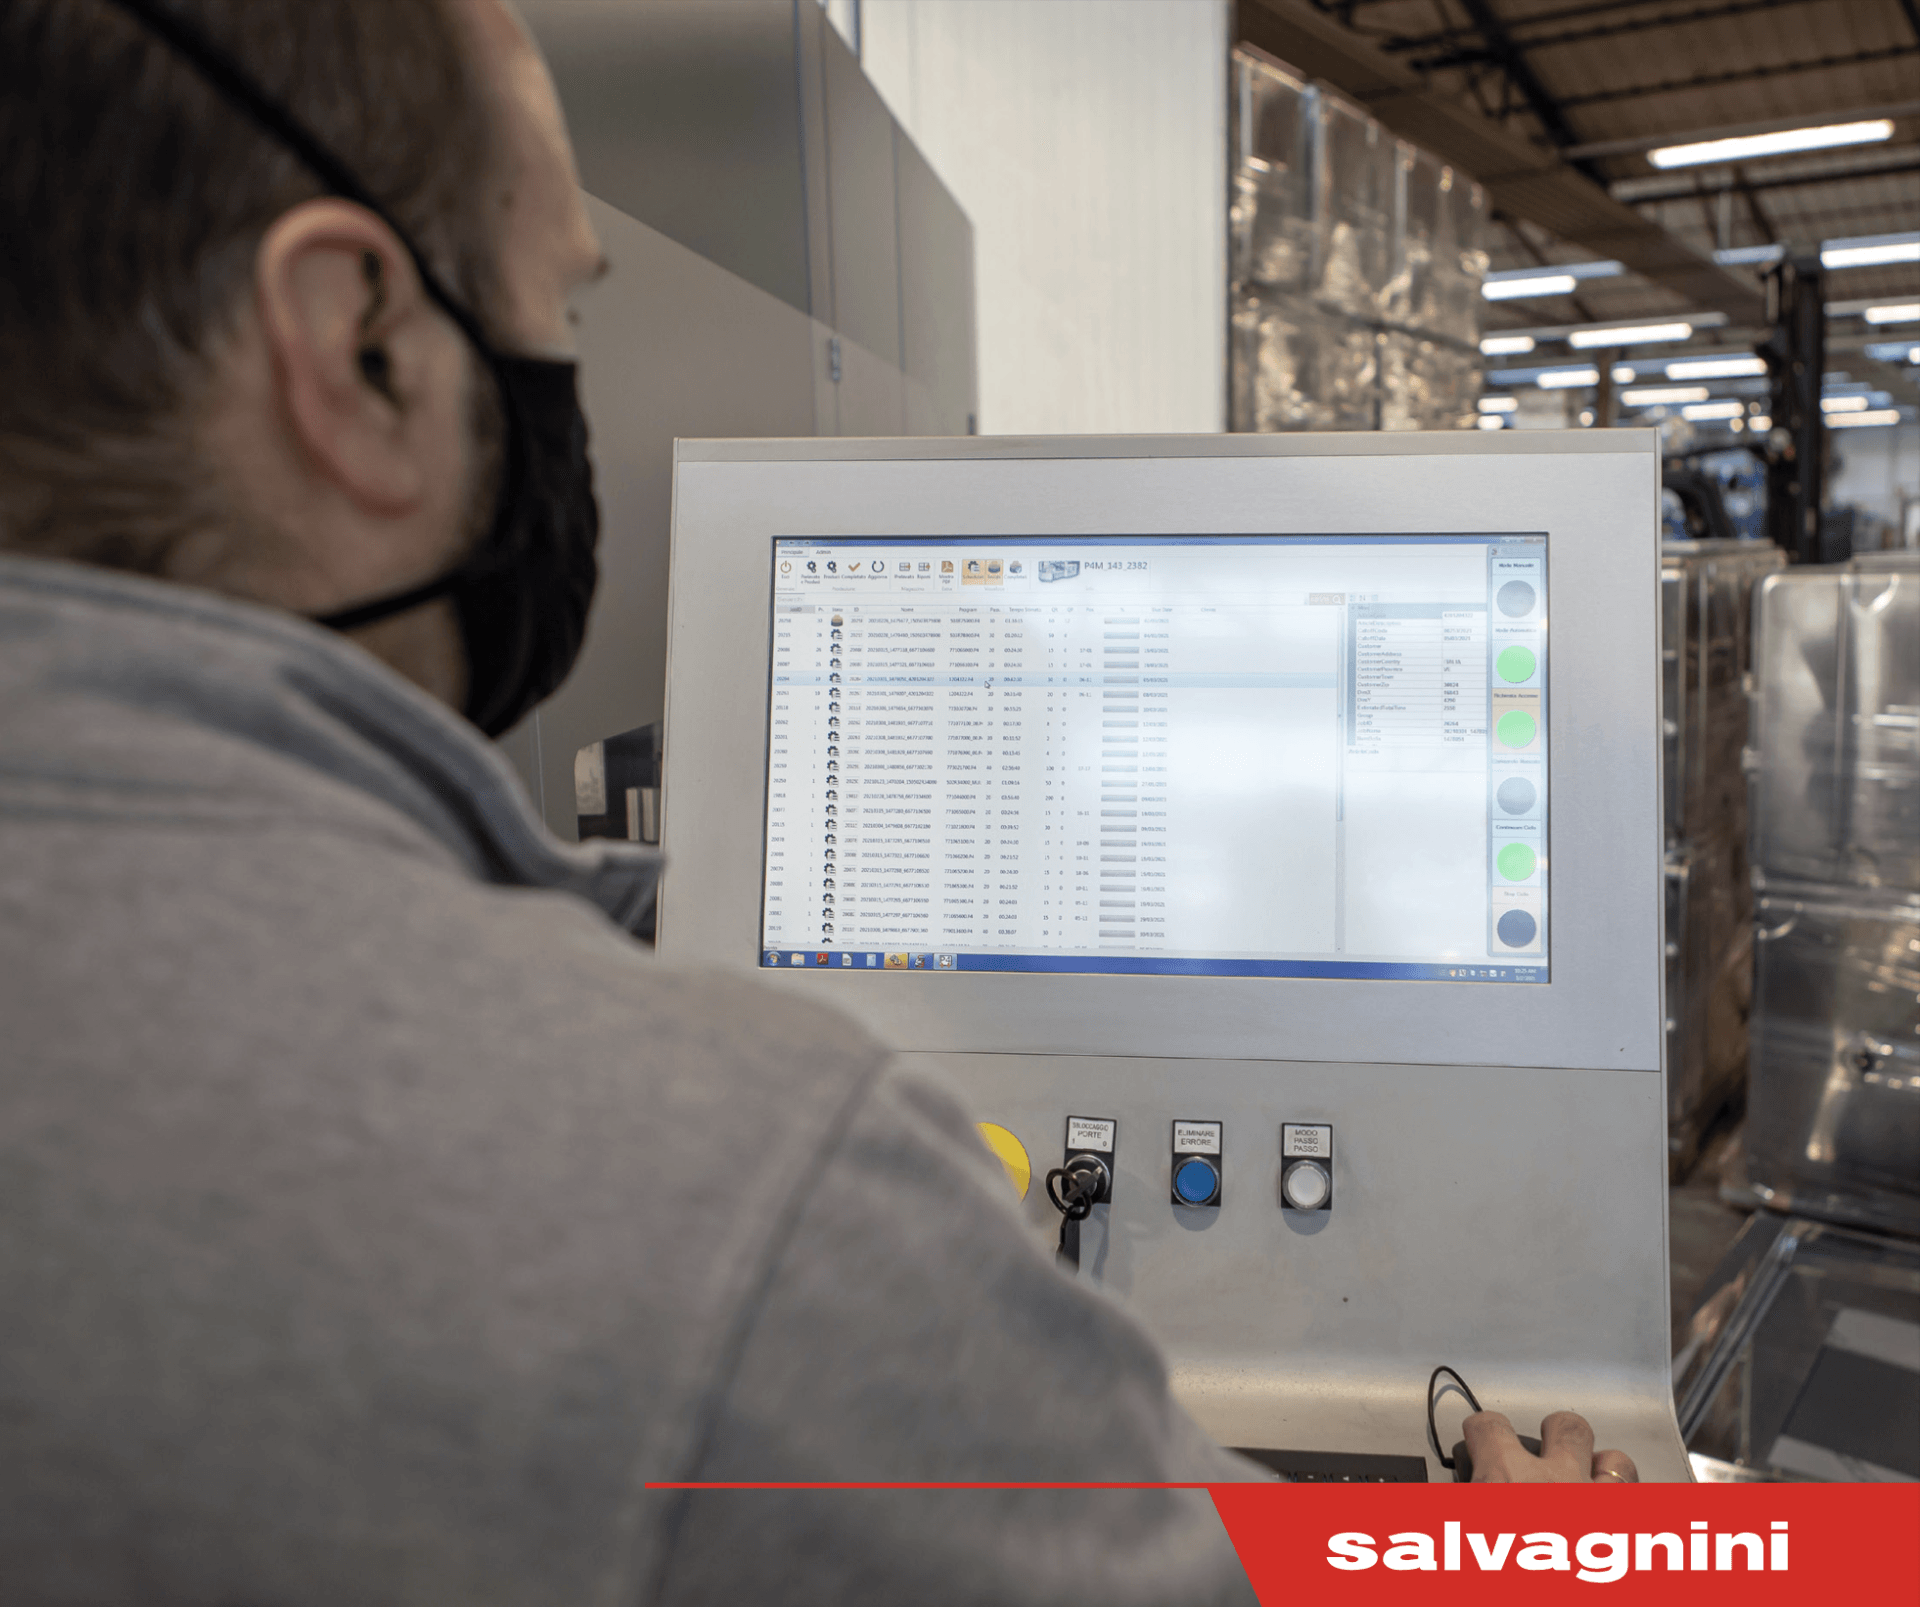 Salvagnini Employee using lean manufacturing software